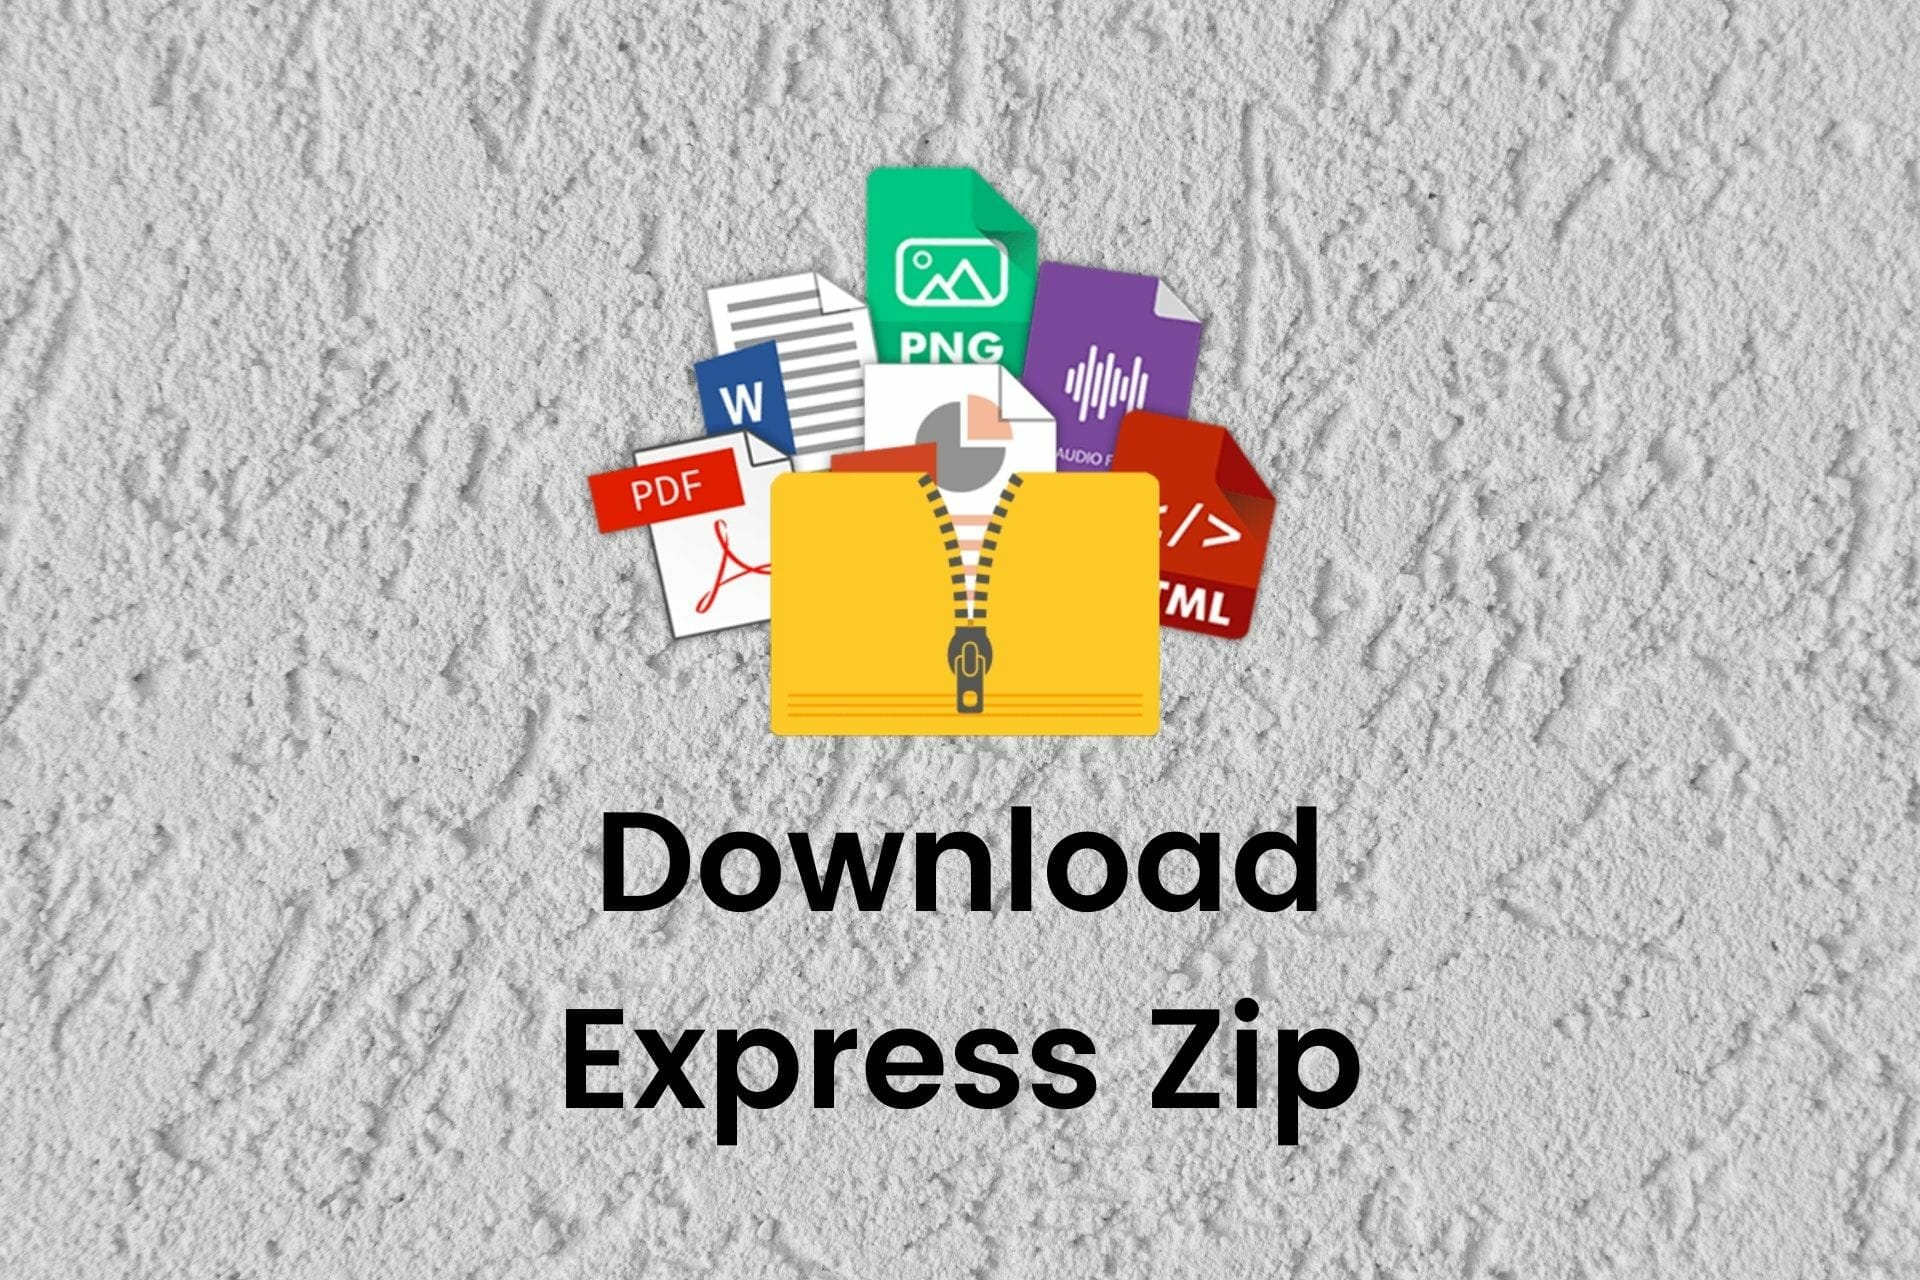 express zip file compression software 2.40 code